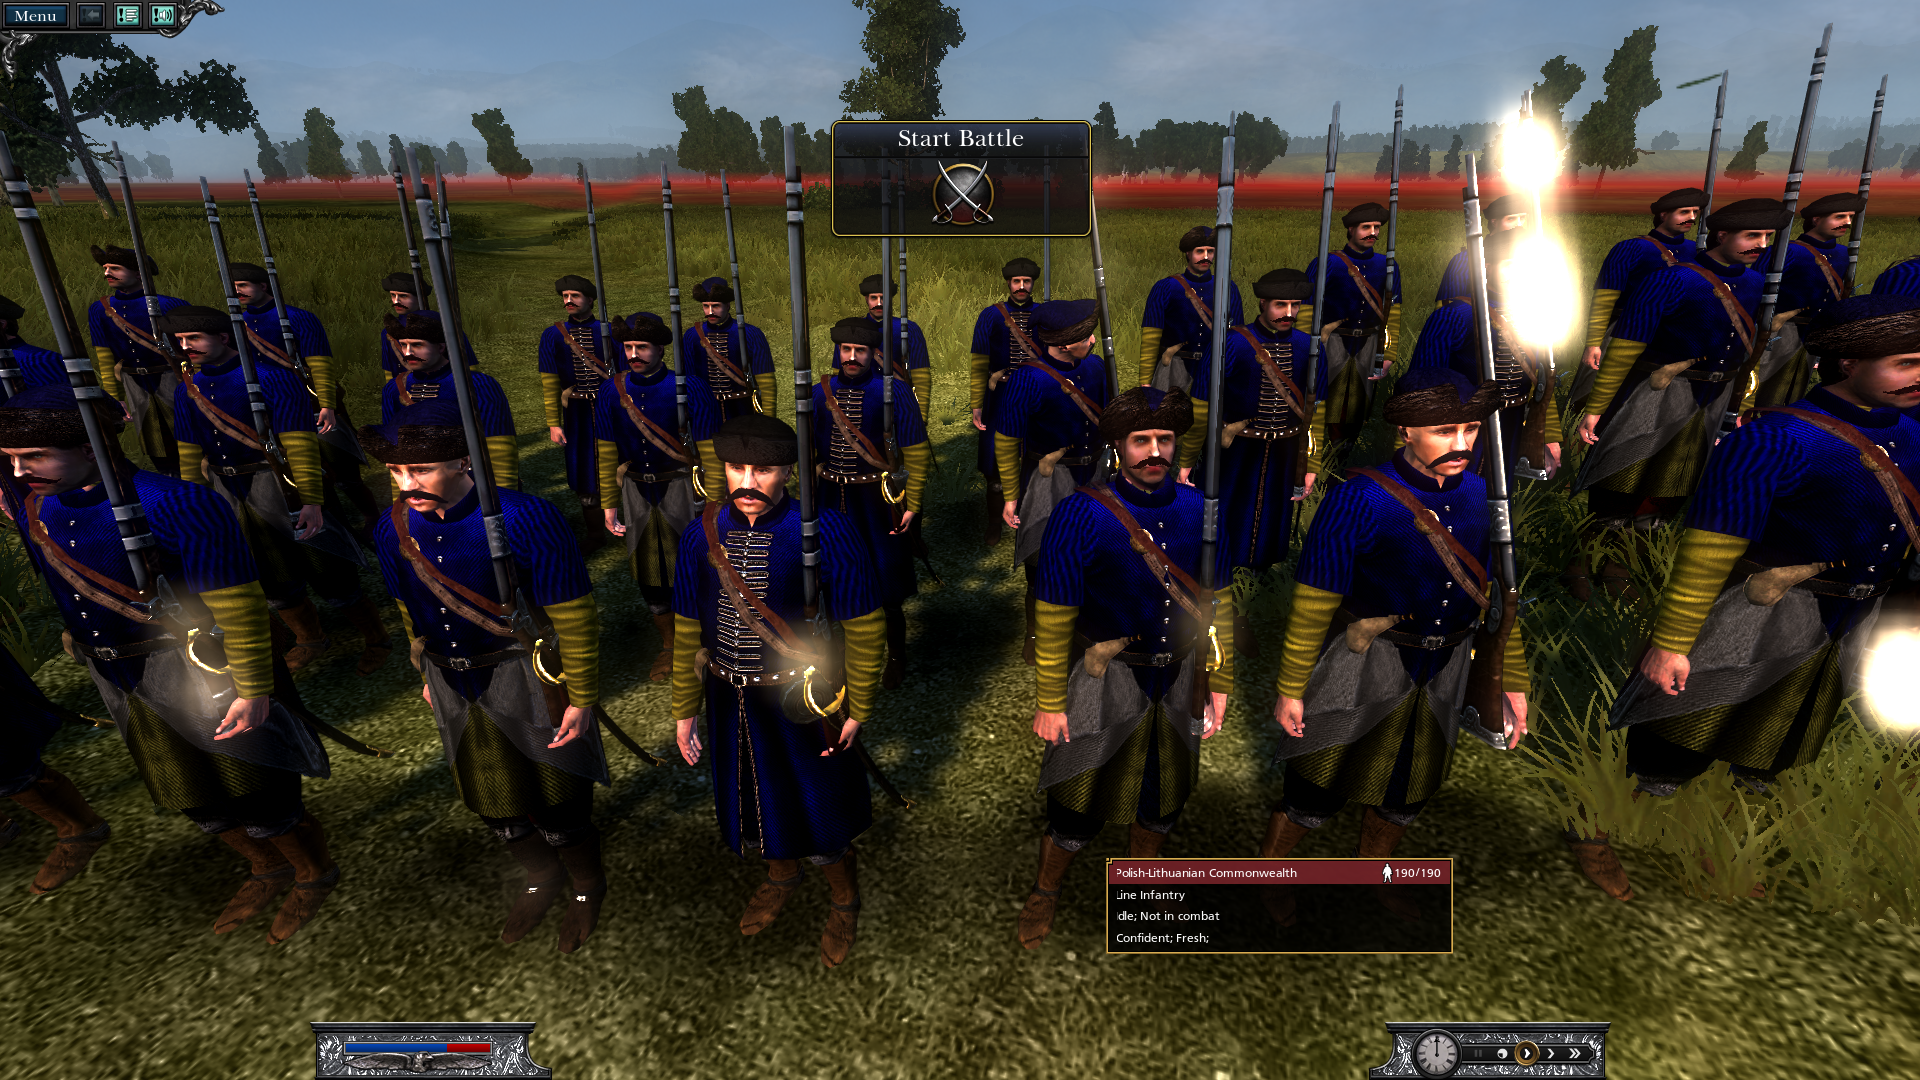 New Polish officer image - Pike and Shot: Total War mod for